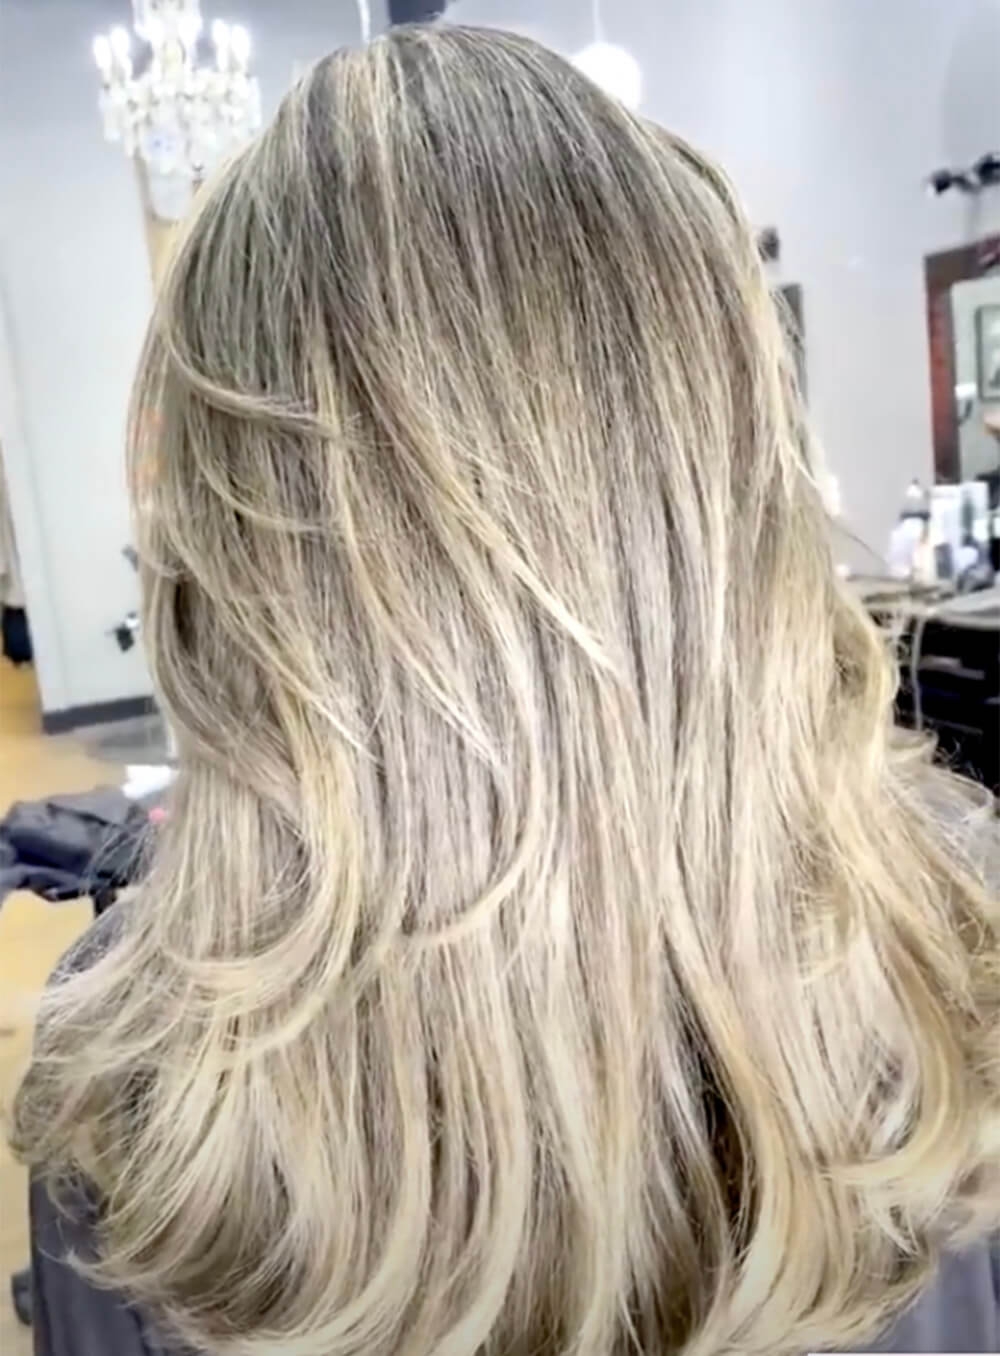 A Hair toner can your blonde hair. Here's how! - Ugly Duckling